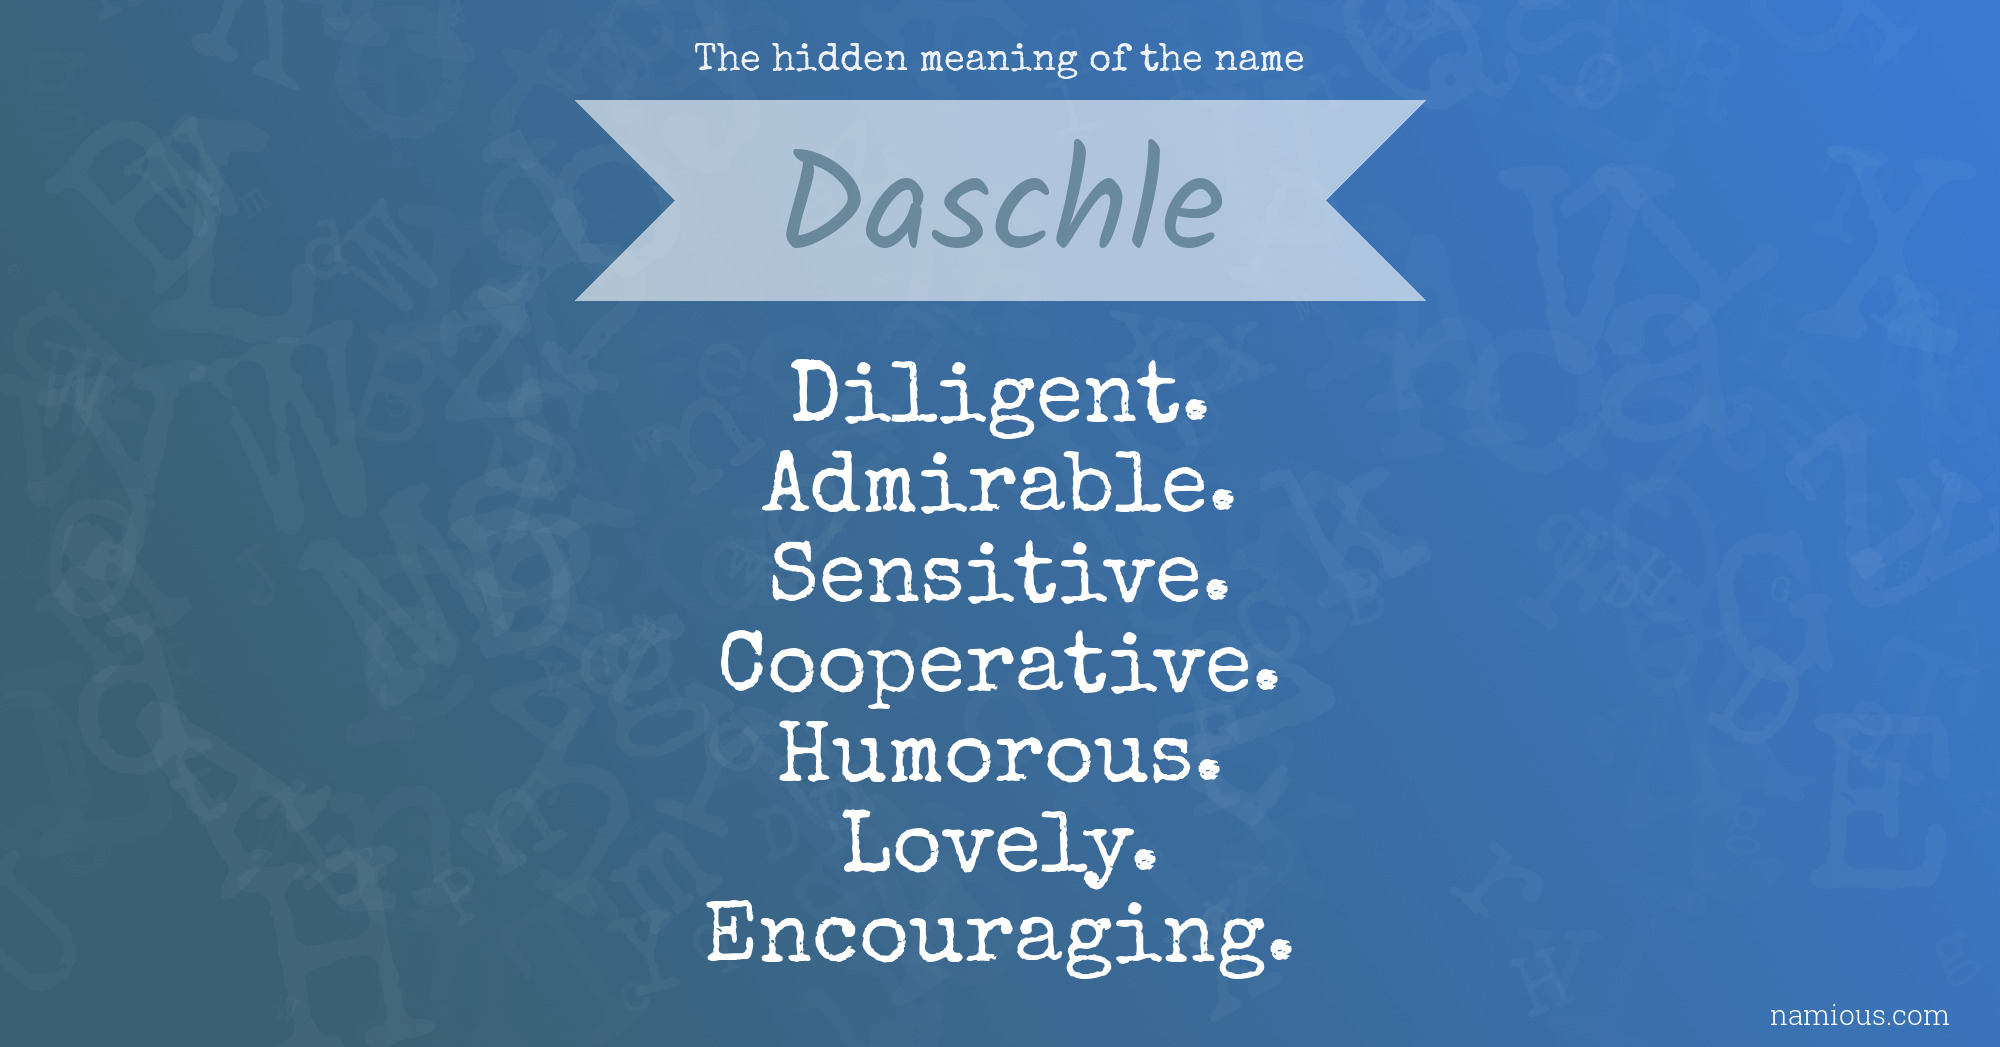 The hidden meaning of the name Daschle